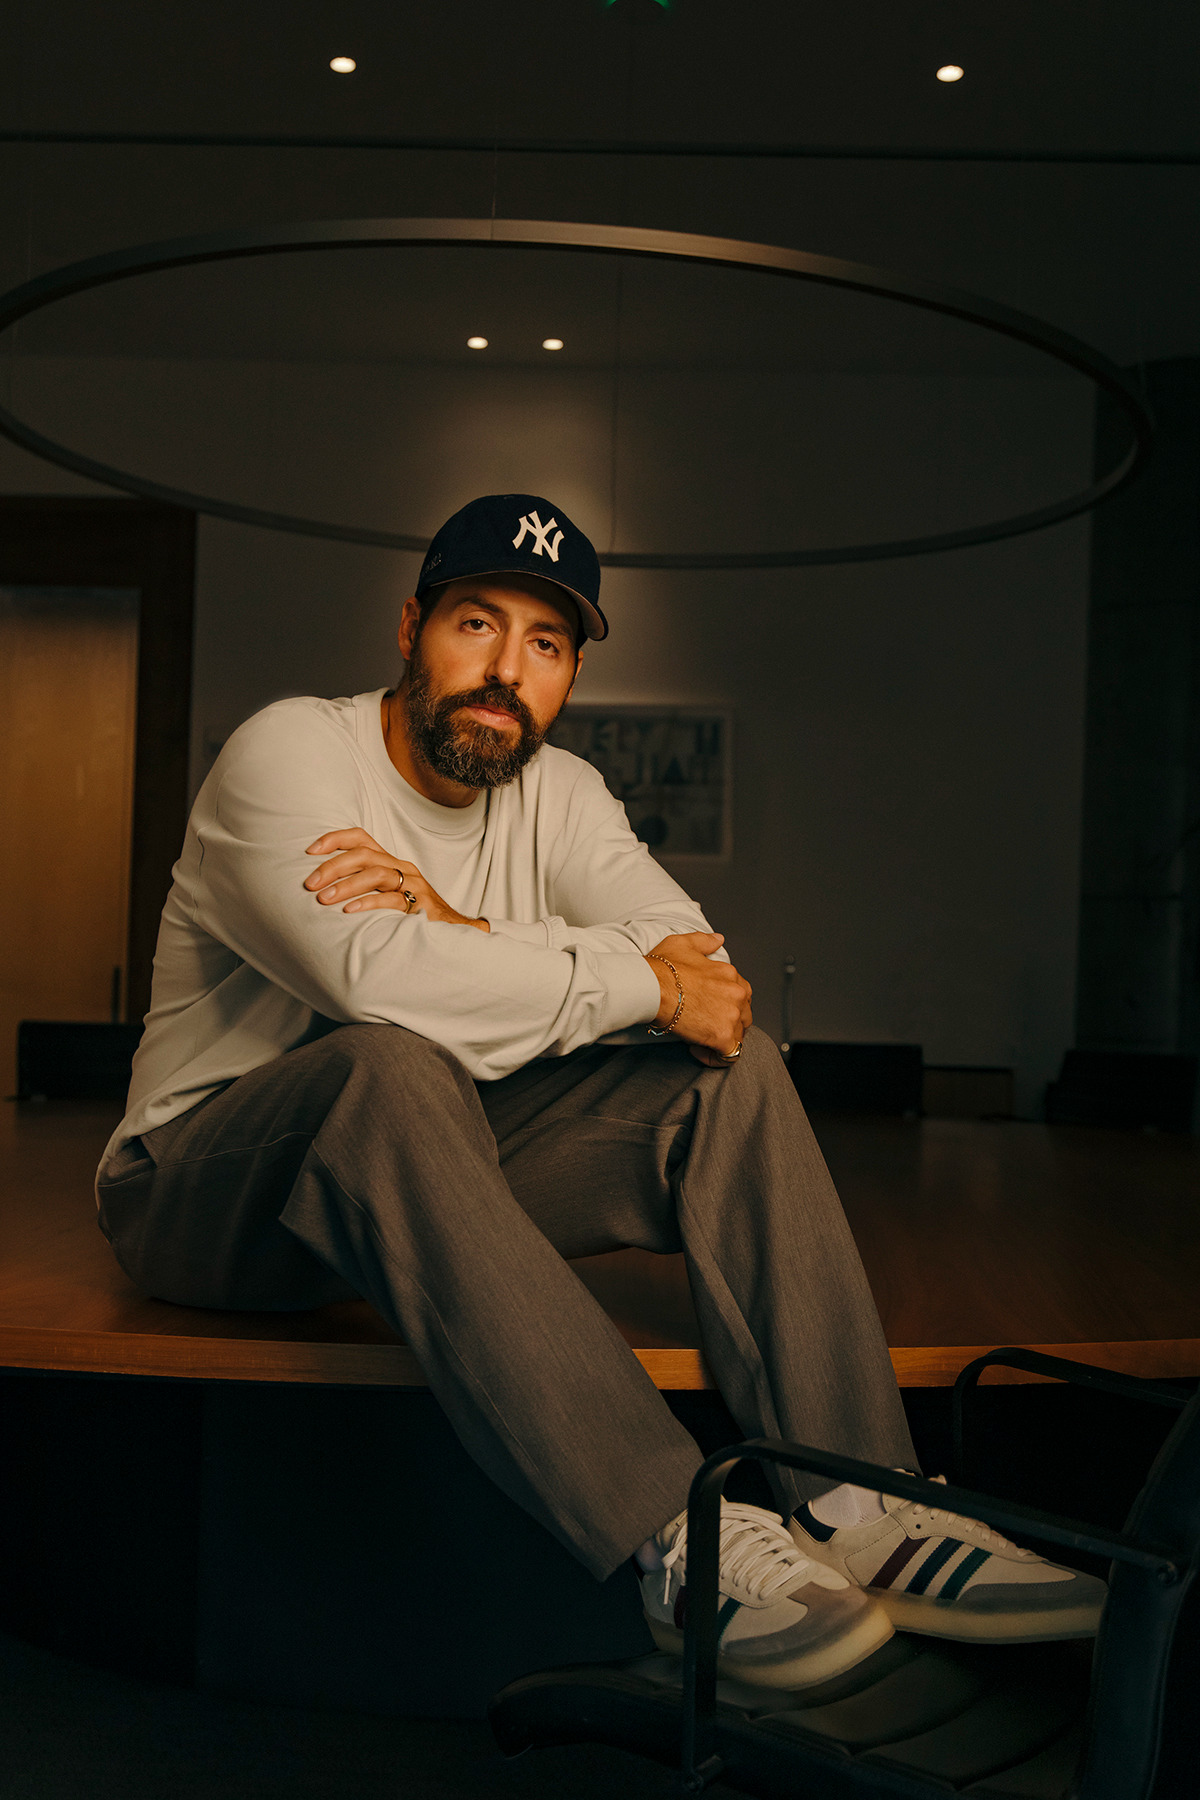 Ronnie Fieg, founder, creative director and CEO of Kith ロニー ファイグ キス クリエイティブ vディレクター